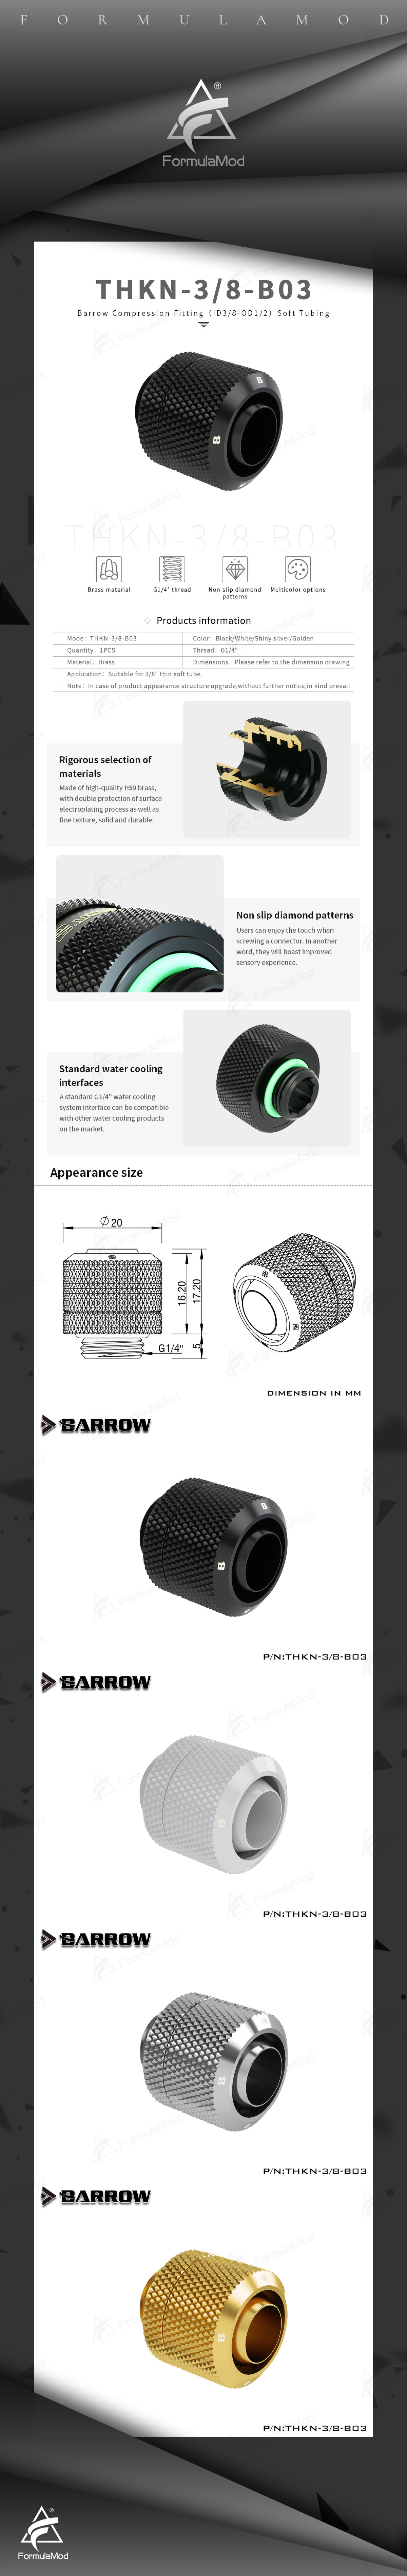 Barrow 10x13mm Soft Tube Fitting, 3/8"ID*1/2"OD G1/4" Compression Connector, Water Cooling Soft Tubing Compression Adapter, THKN-3/8-B03  